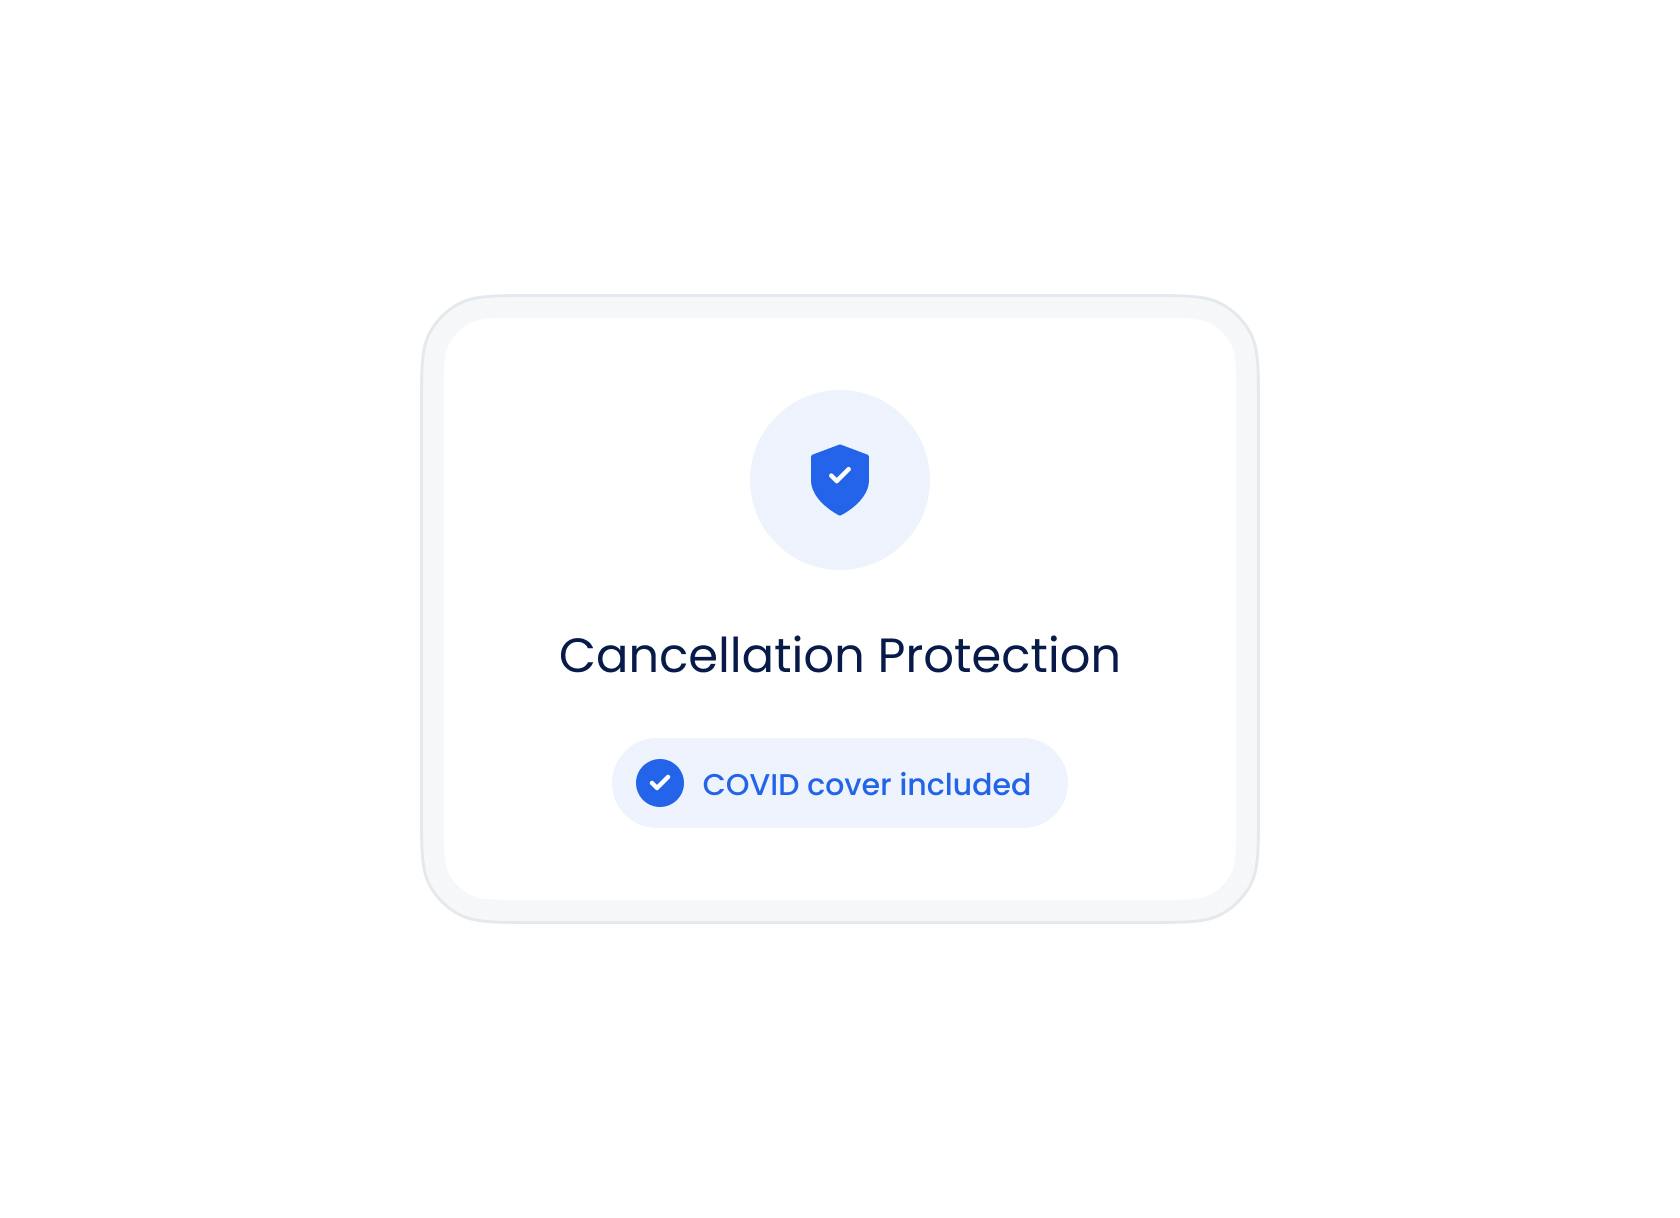 Alternative Airlines cancellation protection